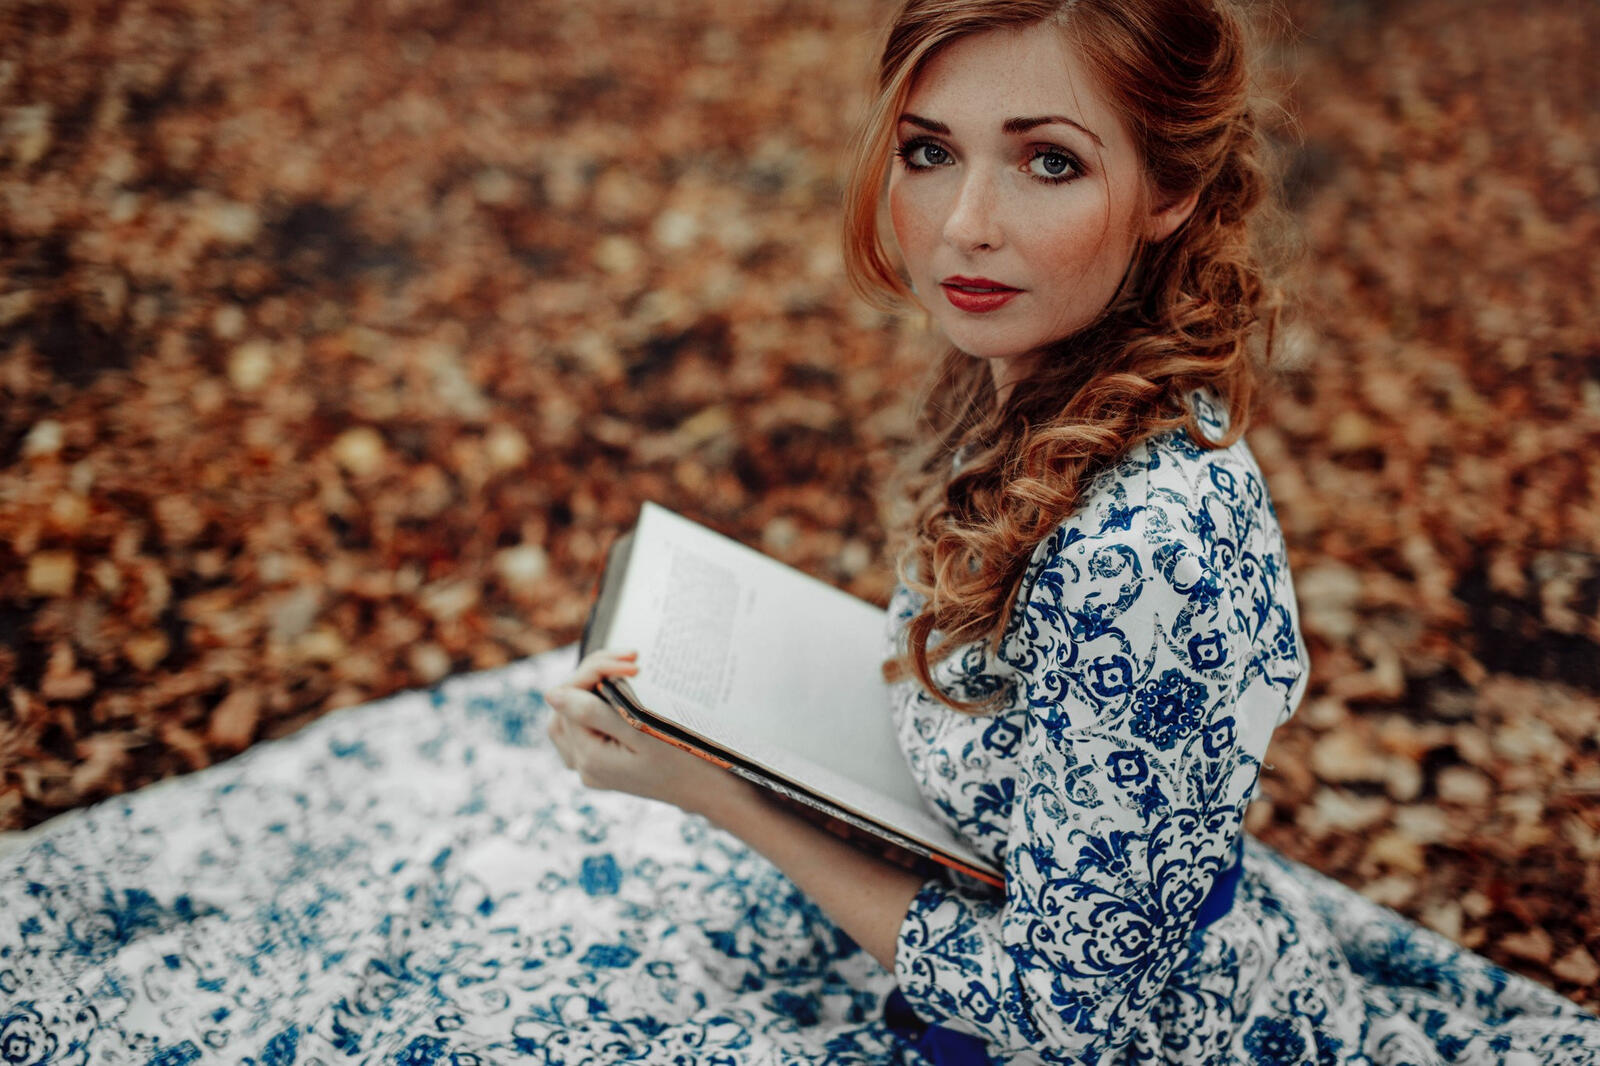 Free photo A girl in a white dress with blue patterns reads a book